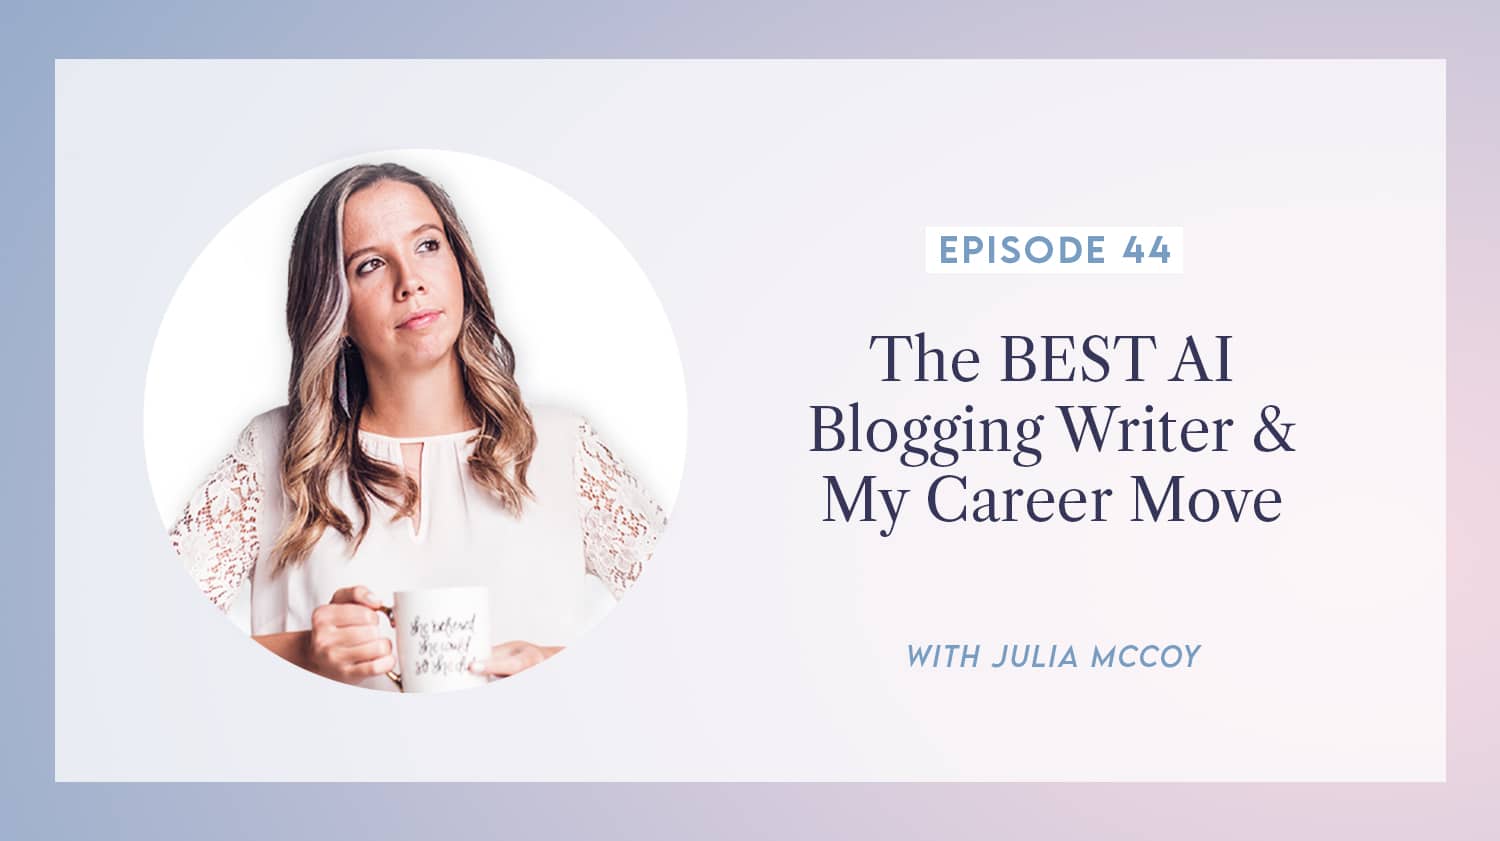 content transformation podcast with julia mccoy episode 44 the bes AI blogging writer & my career move